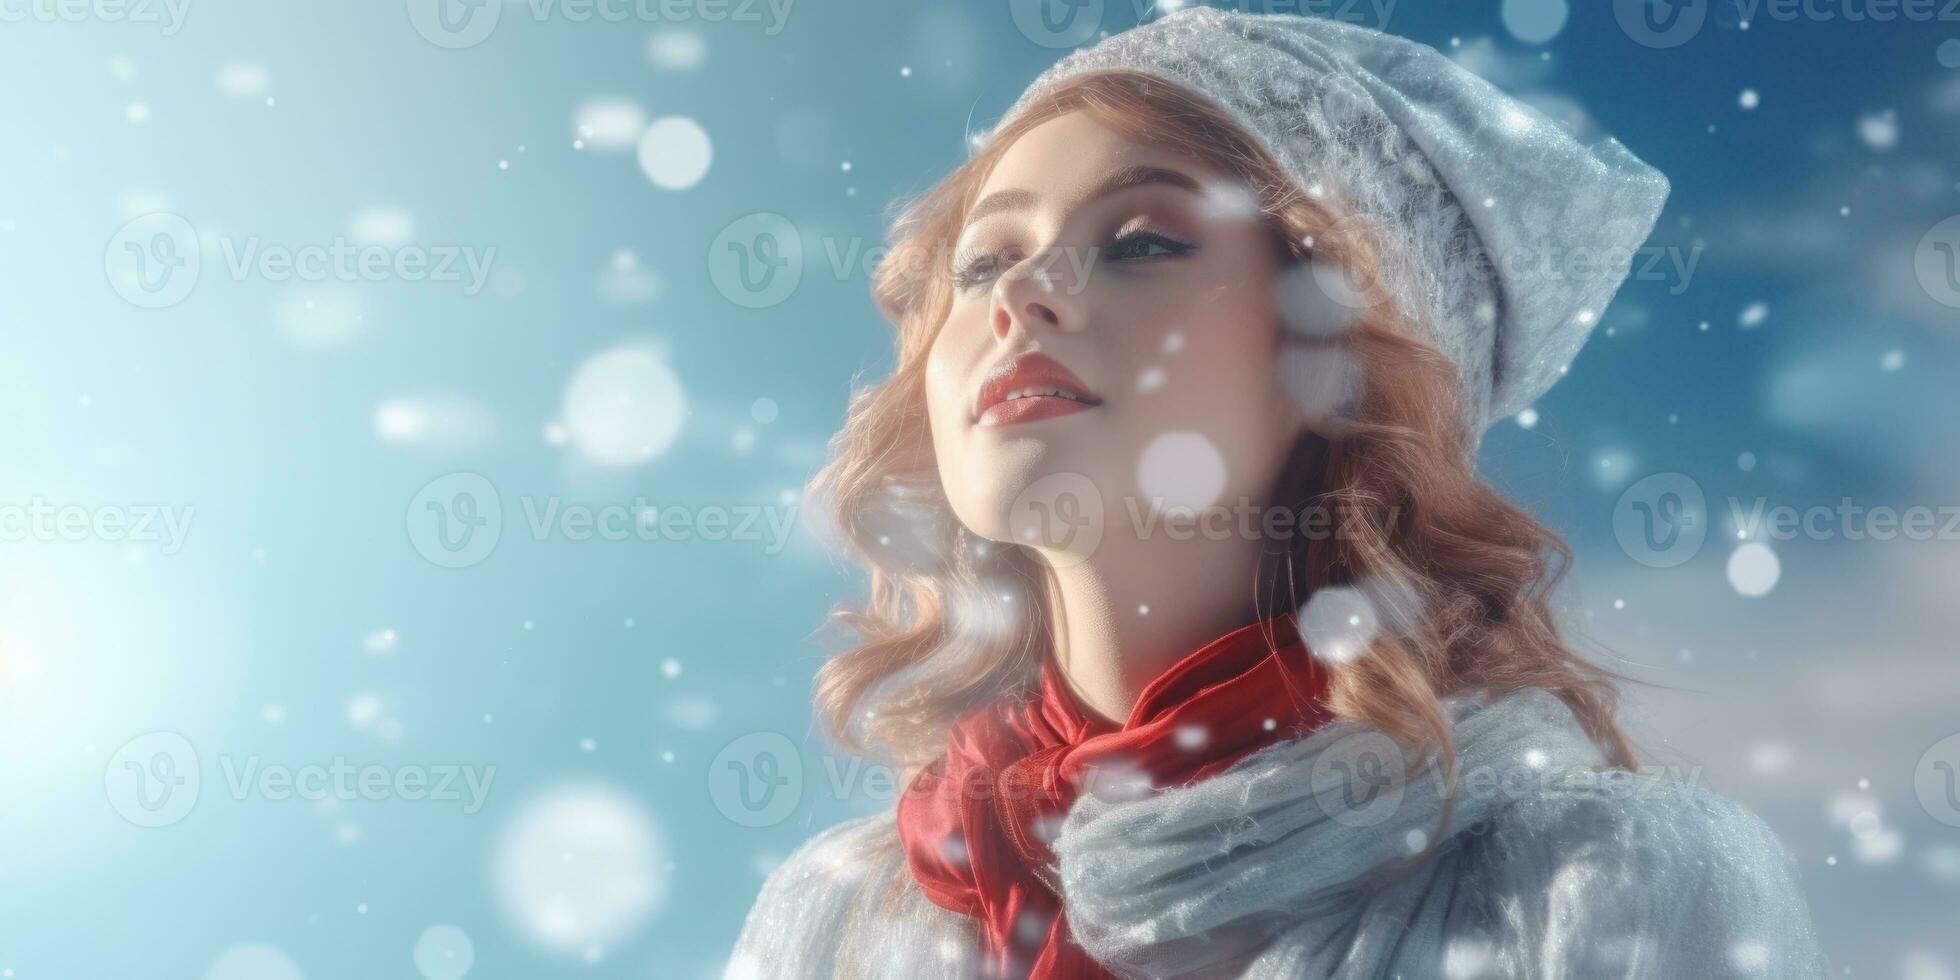 Winter background with beaufiful girl photo